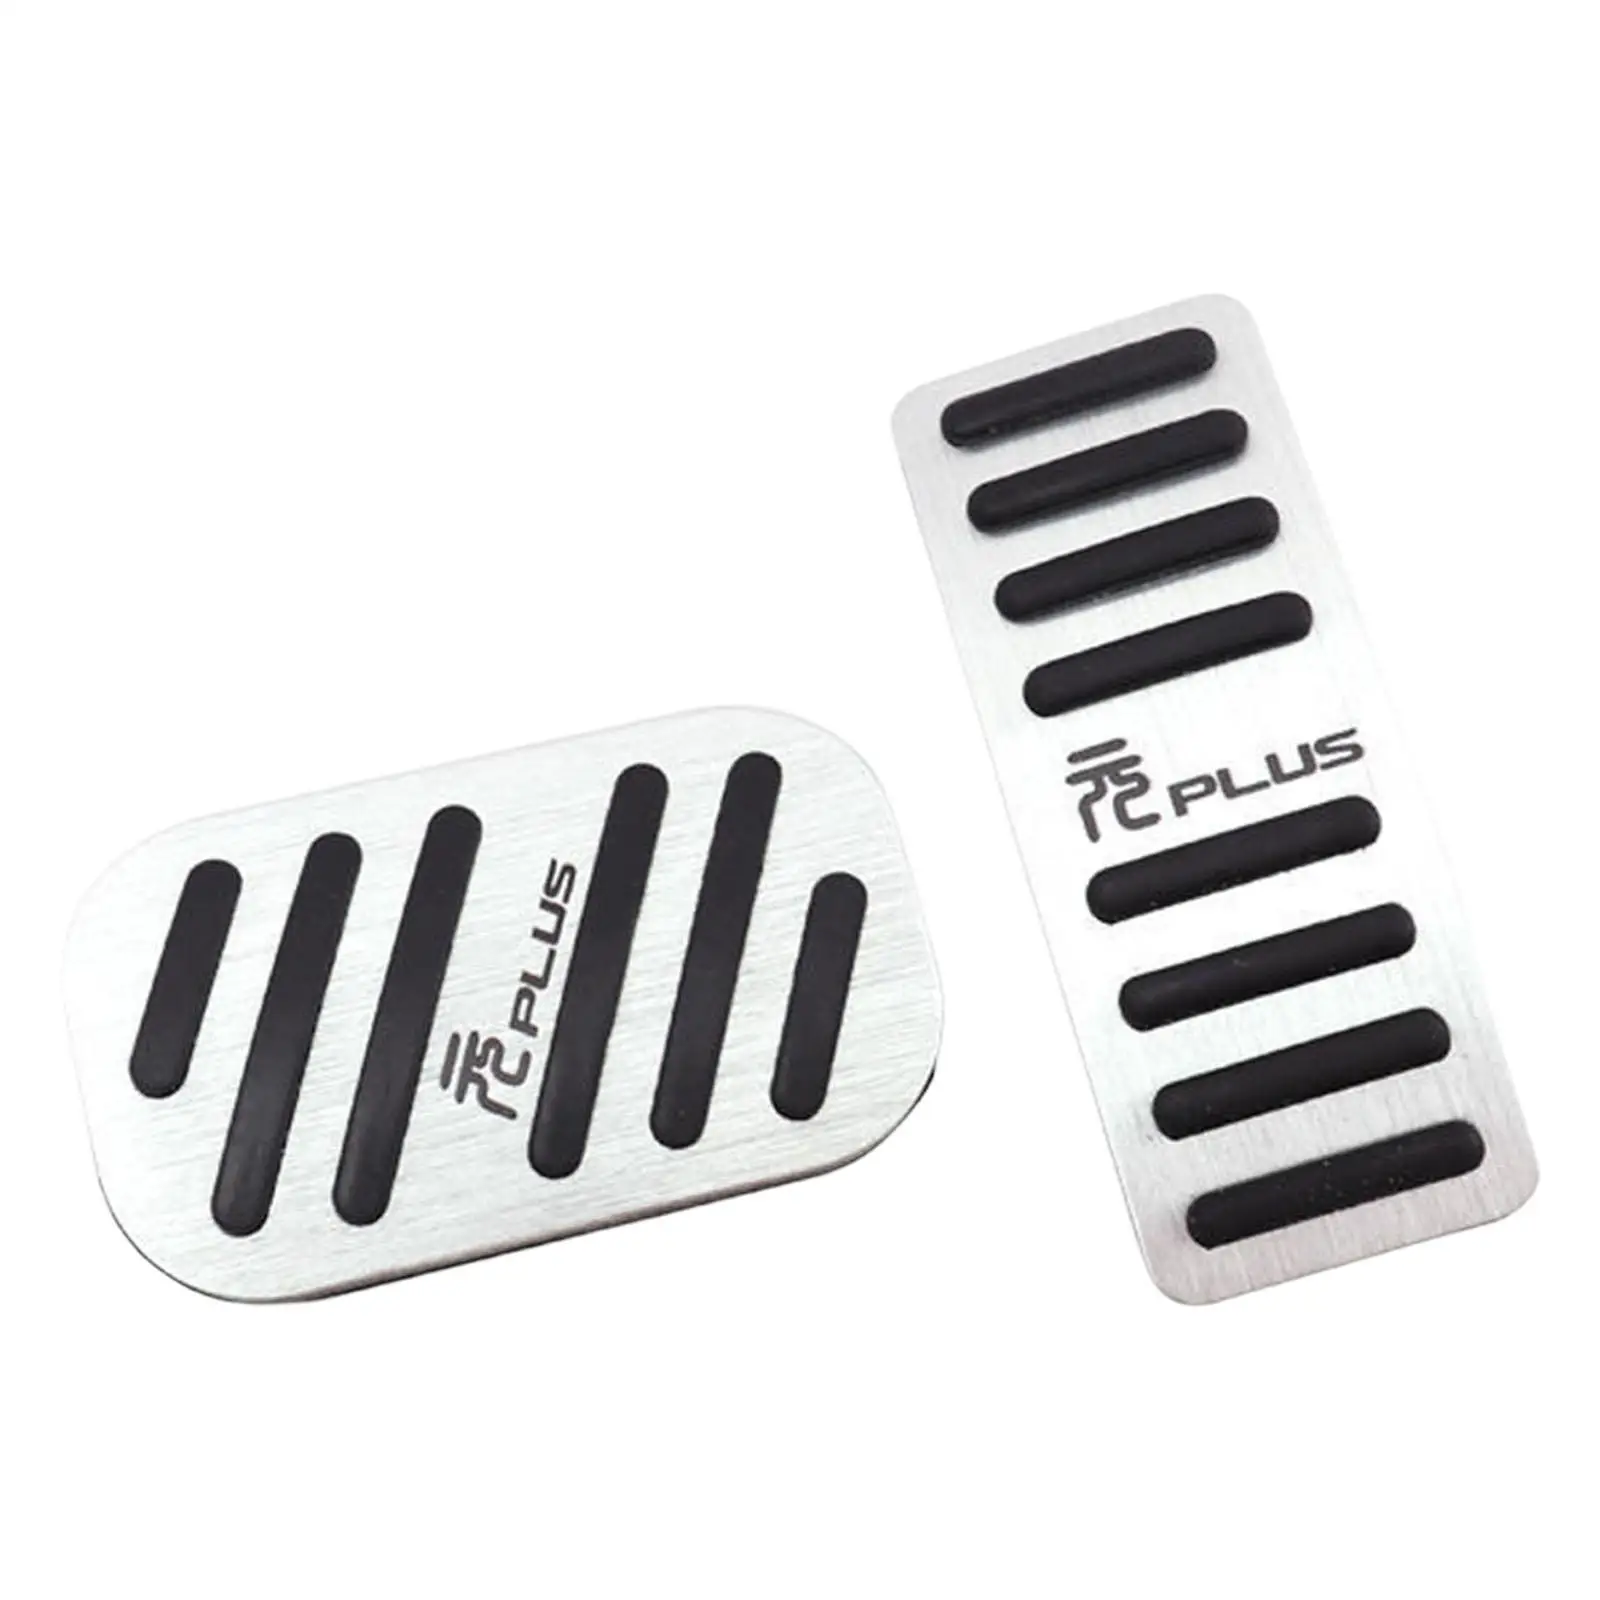 Brake Pedal Cover Gas Pedal Cover Kit Aluminium Alloy for Byd Atto 3 Yuan Plus